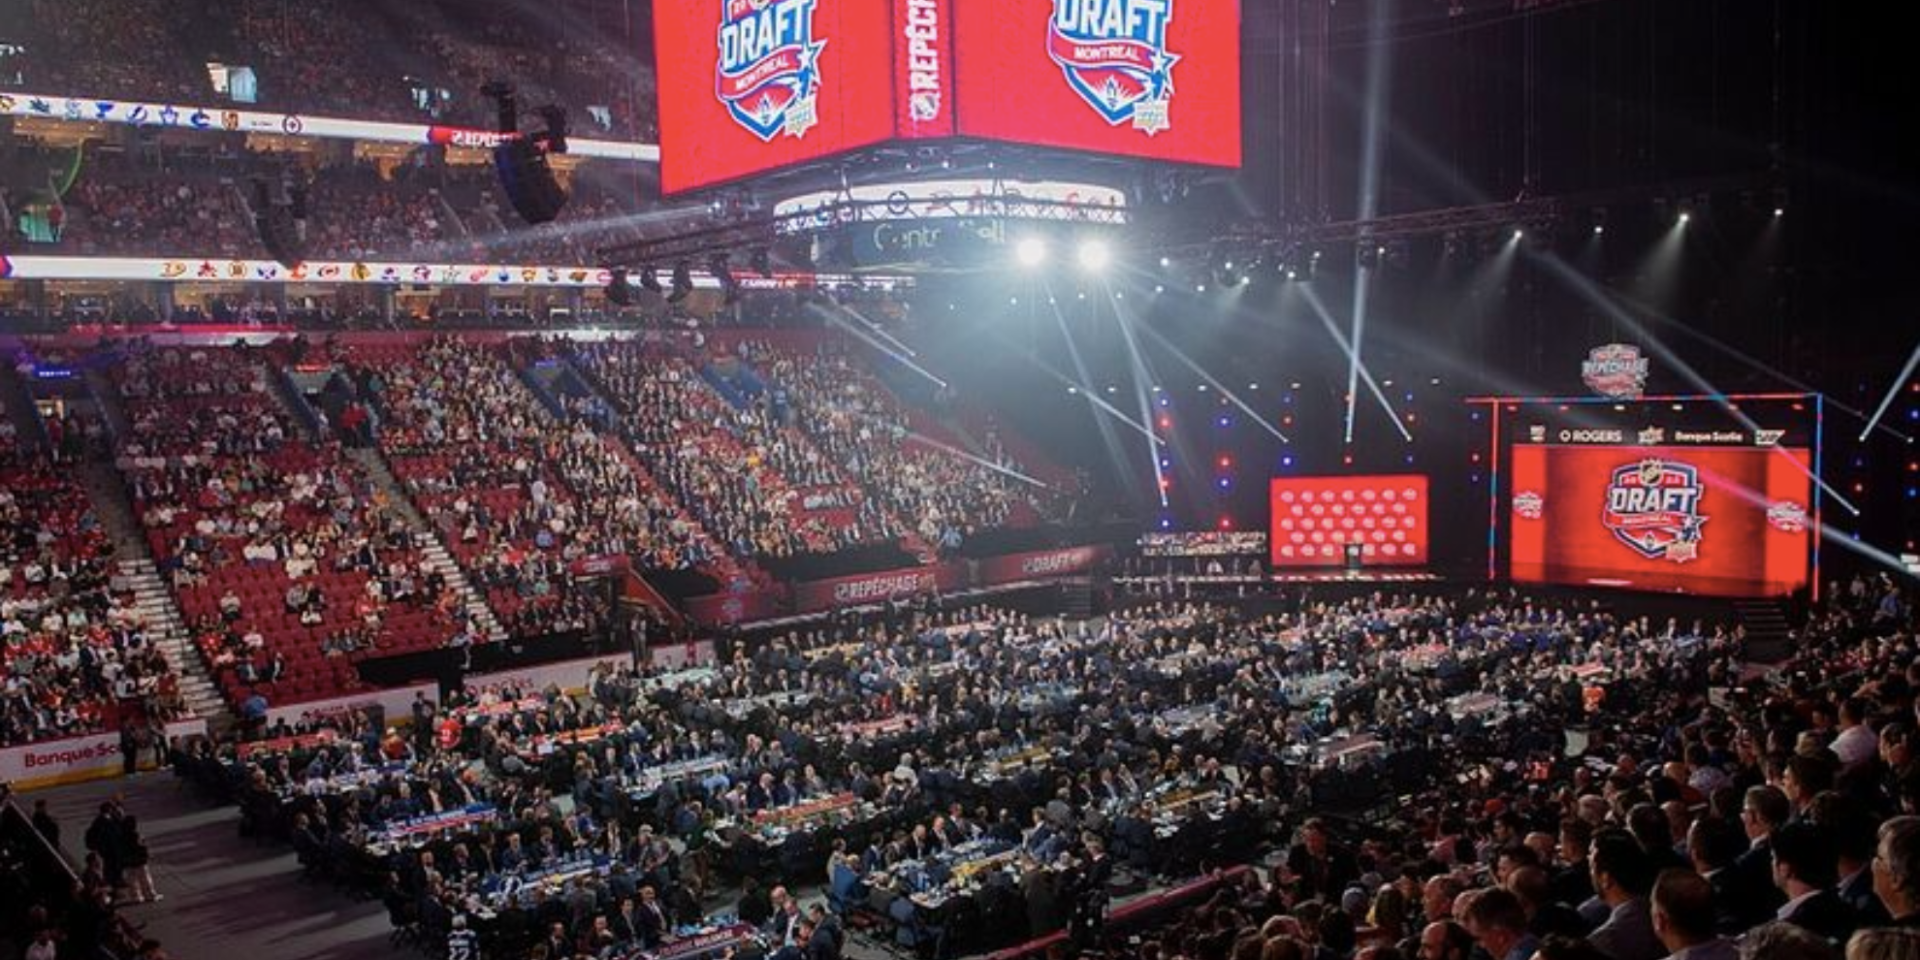 NHL Draft 2023 Mock: Which players will be drafted in the first rounds and with which teams?